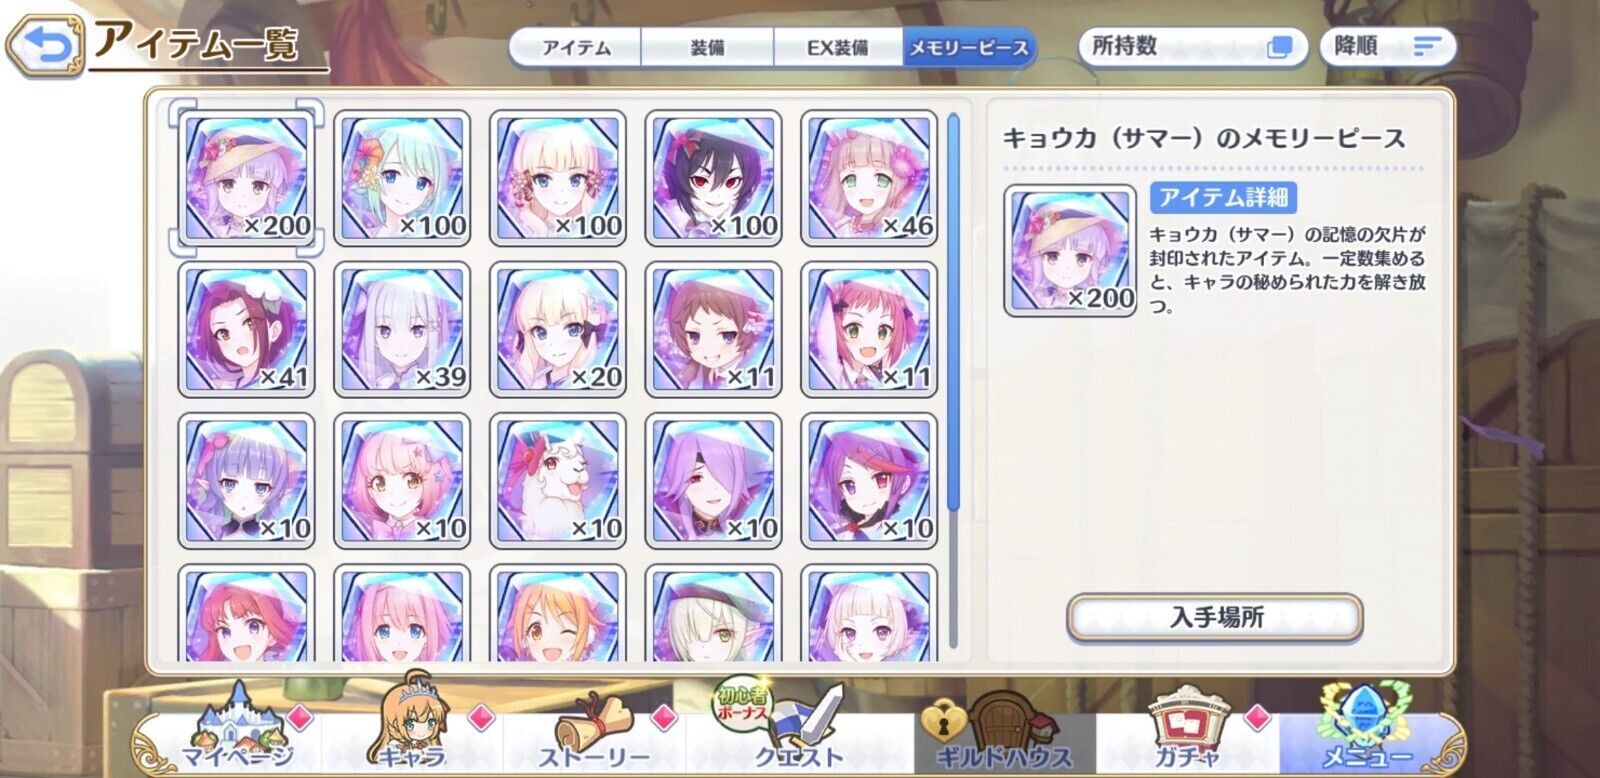 [JP][INSTANT] Priconne 27x3* +200k Jewels 6x3* tickets Starter Account Princess Connect Re:Dive-Mobile Games Starter